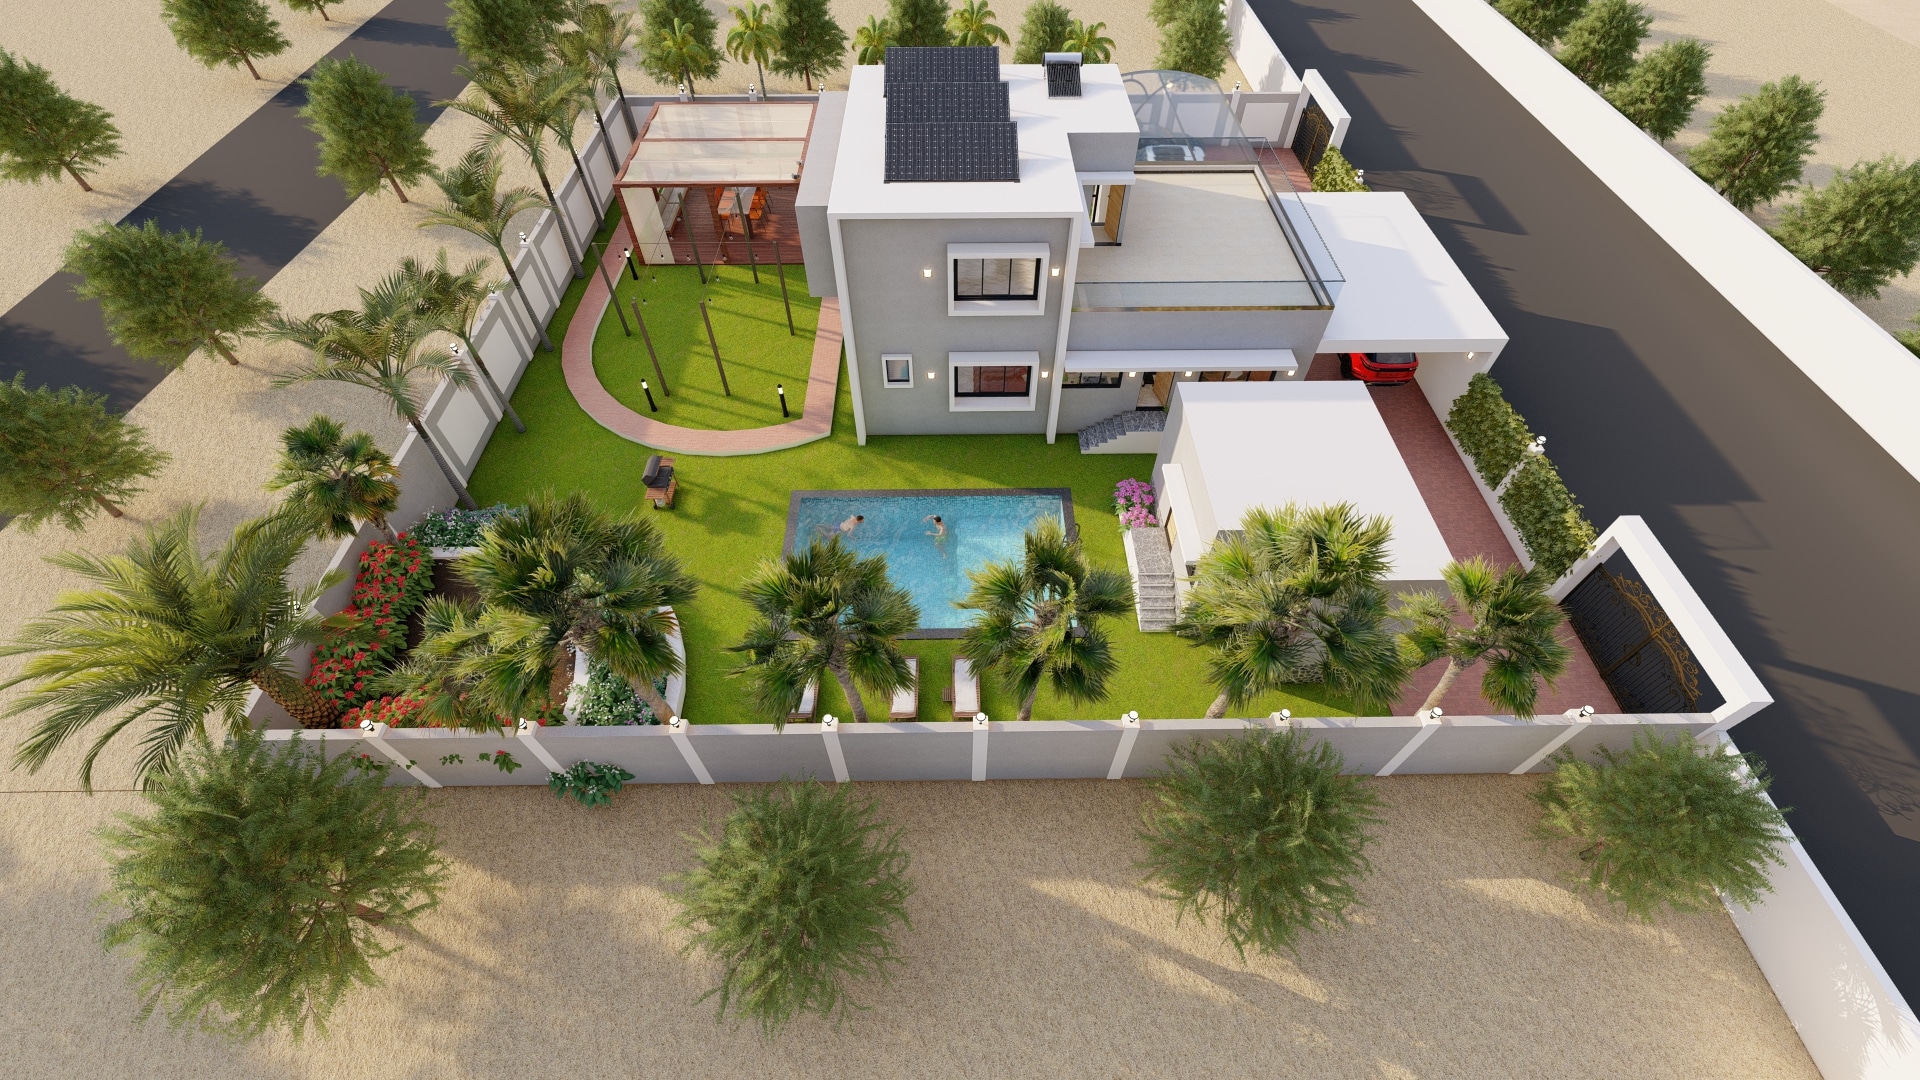 own an earning villa countryside leisure home by urban terrace